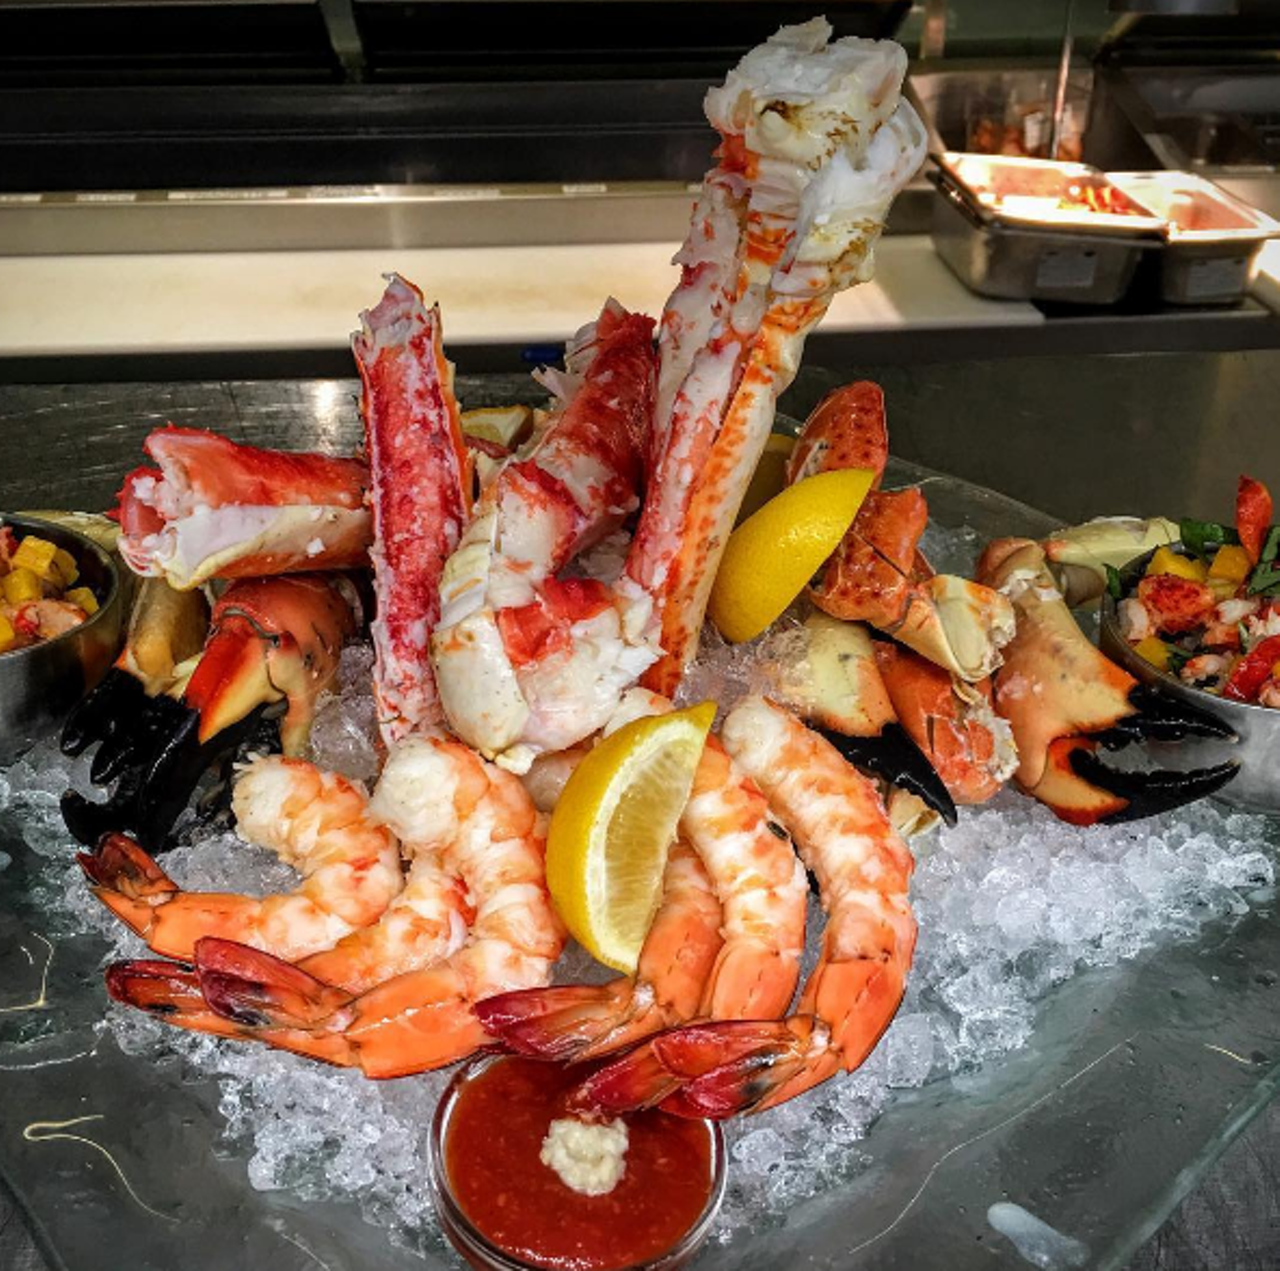 Seafood plateau at Del Frisco&#146;s Double Eagle Steakhouse 
9150 International Drive, 407-351-5074
Go big or go home with this towering mountain of raw and steamed seafood for either two or four guests. On deck: Alaskan king crab legs, jumbo shrimp and crab claws. Add lobster cocktail or jumbo lump crab for a little extra.
Photo via chefgregthompsonofficial/Instagram